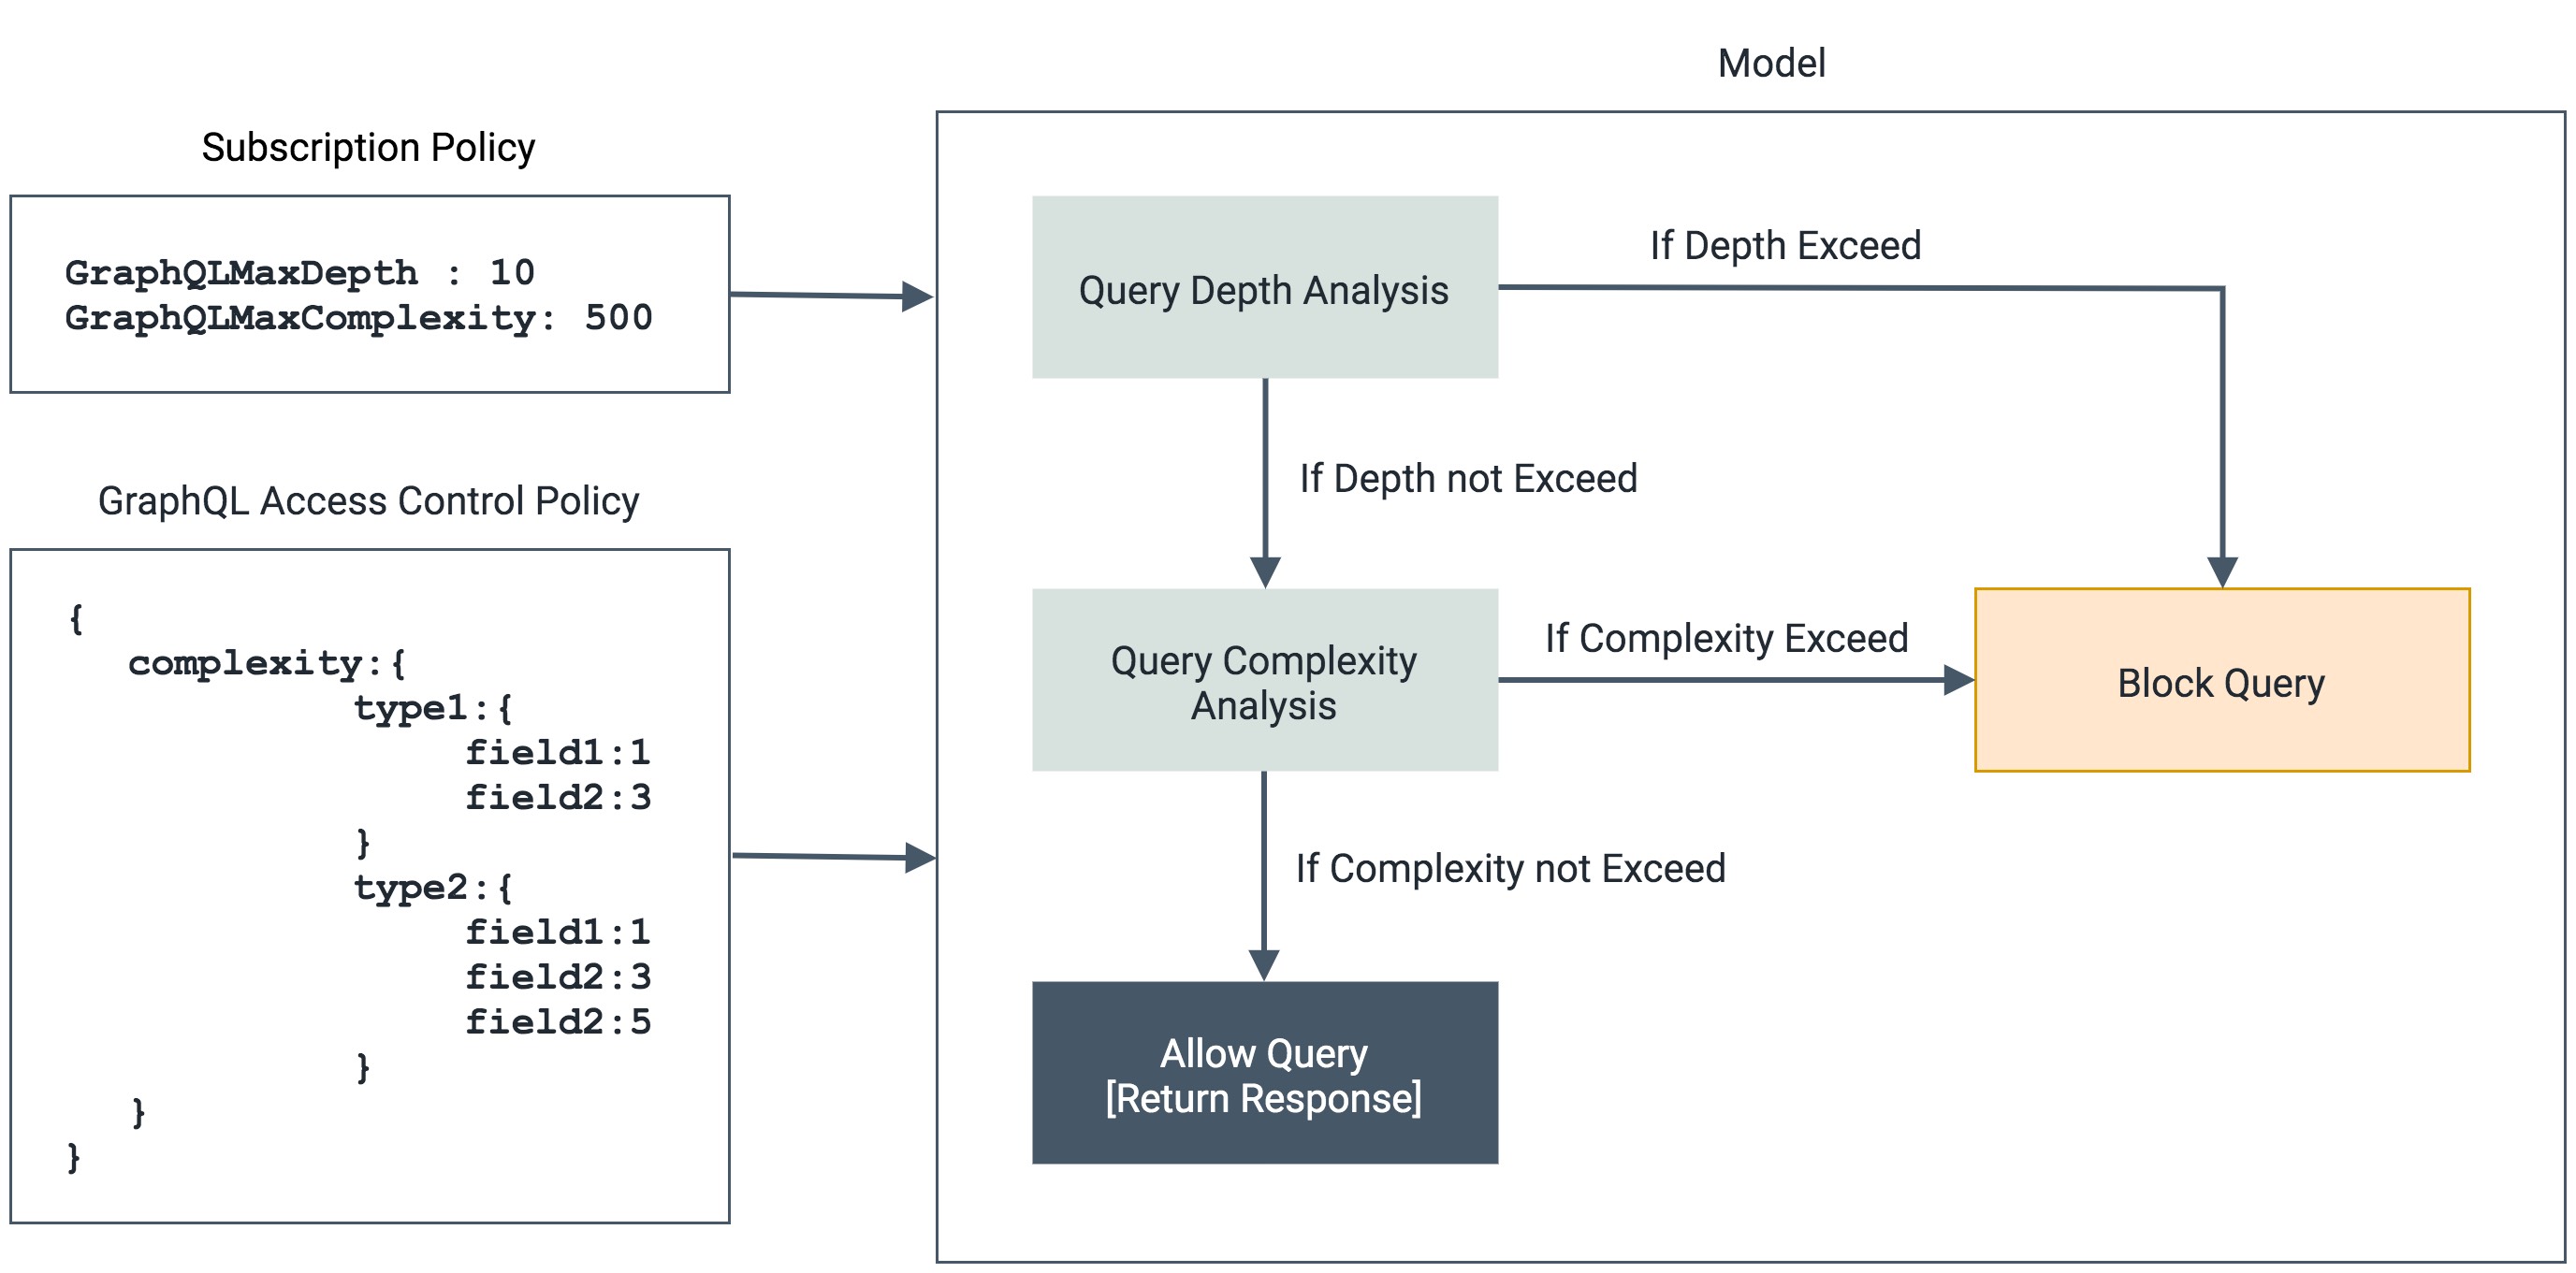 Model of the GraphQL Query Analysis